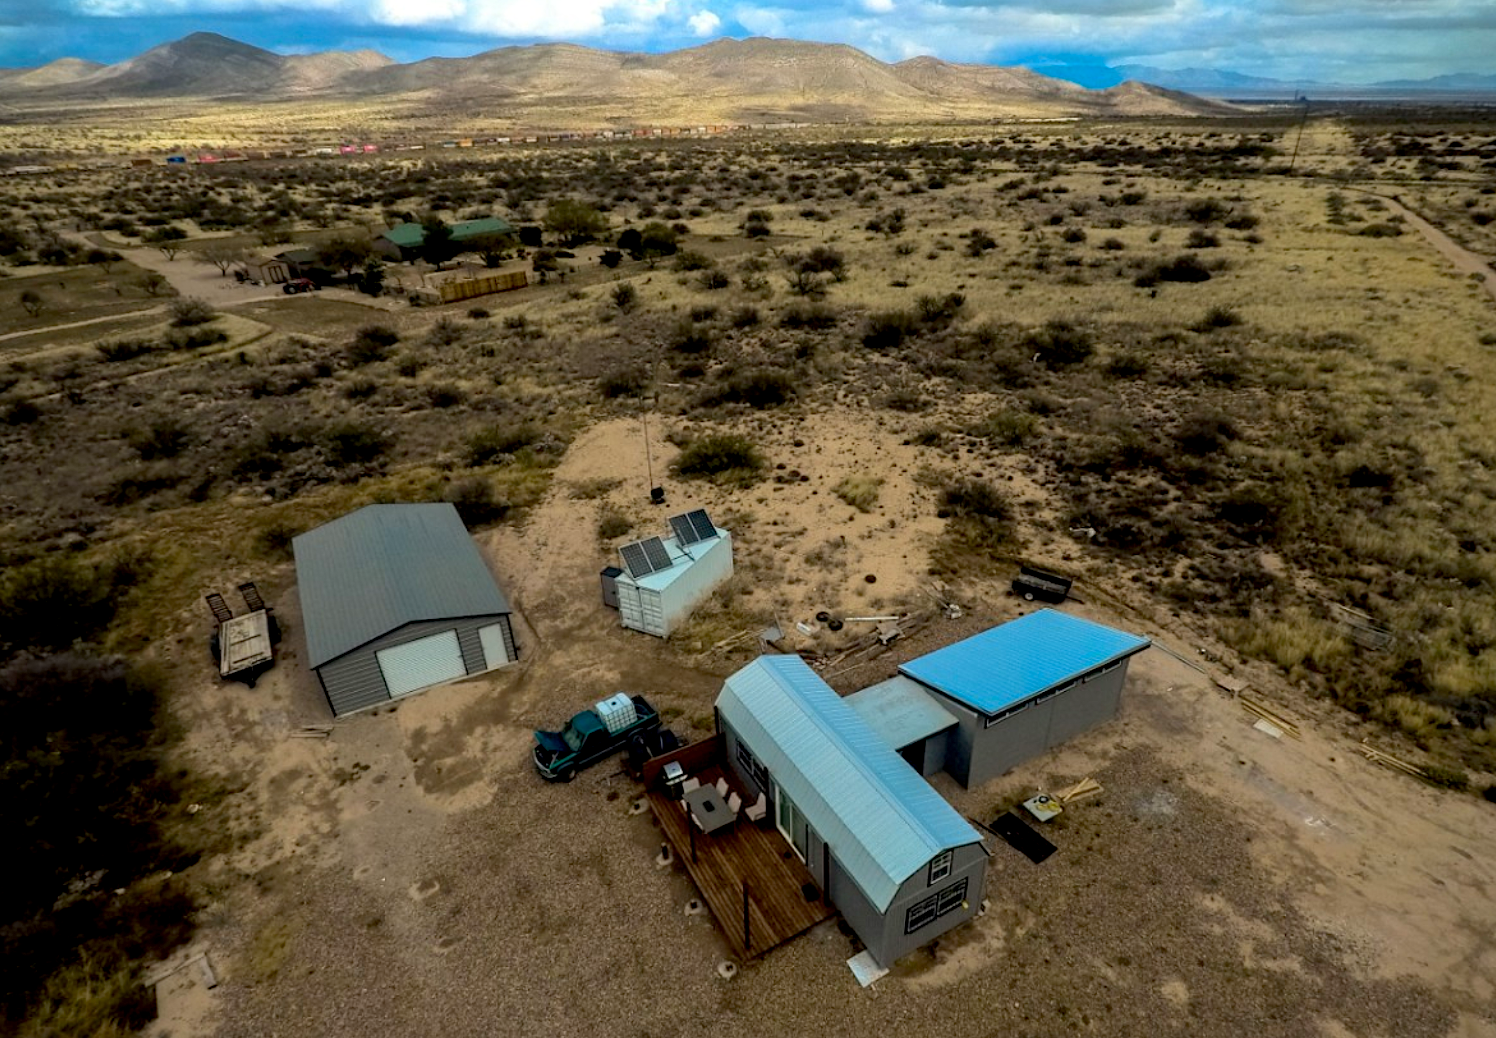 Living Off Grid - Living in a Tiny Homel in the High Desert of Northern Arizona